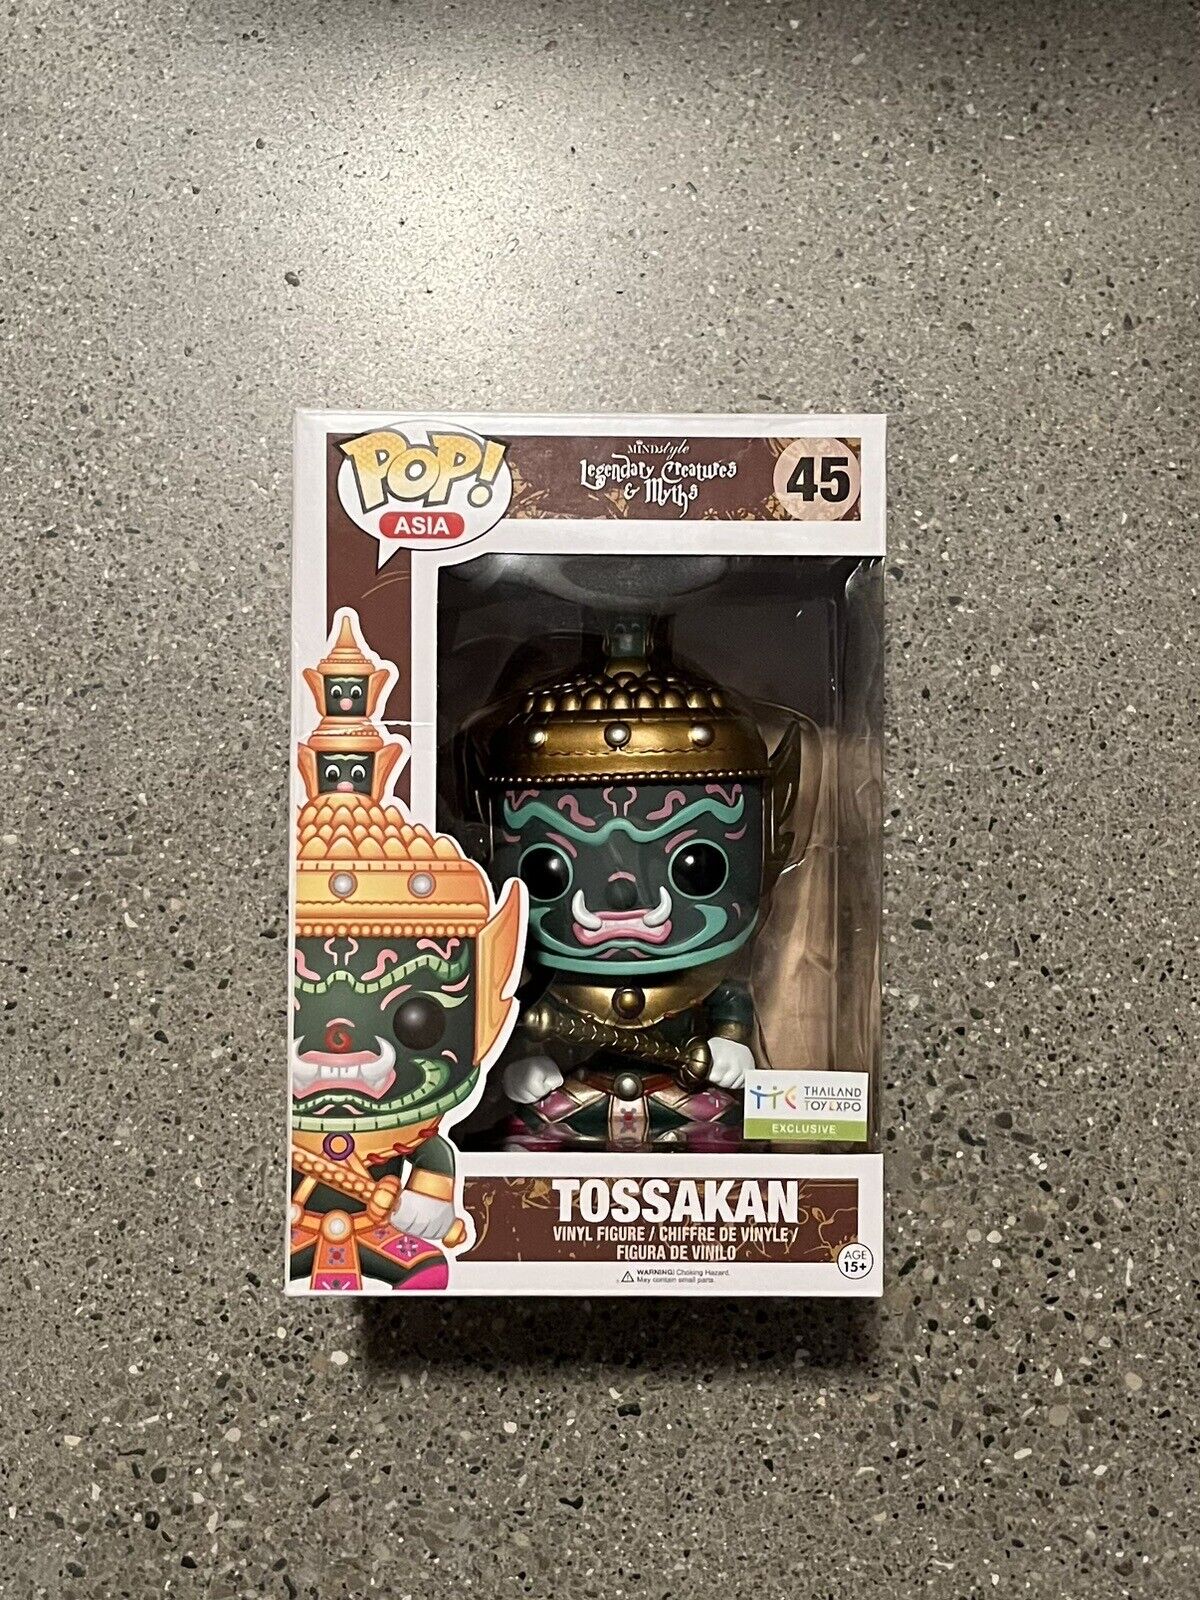 Funko POP Asia Legendary Creatures & Myths GREEN TOSSAKAN - Thailand Toy Expo